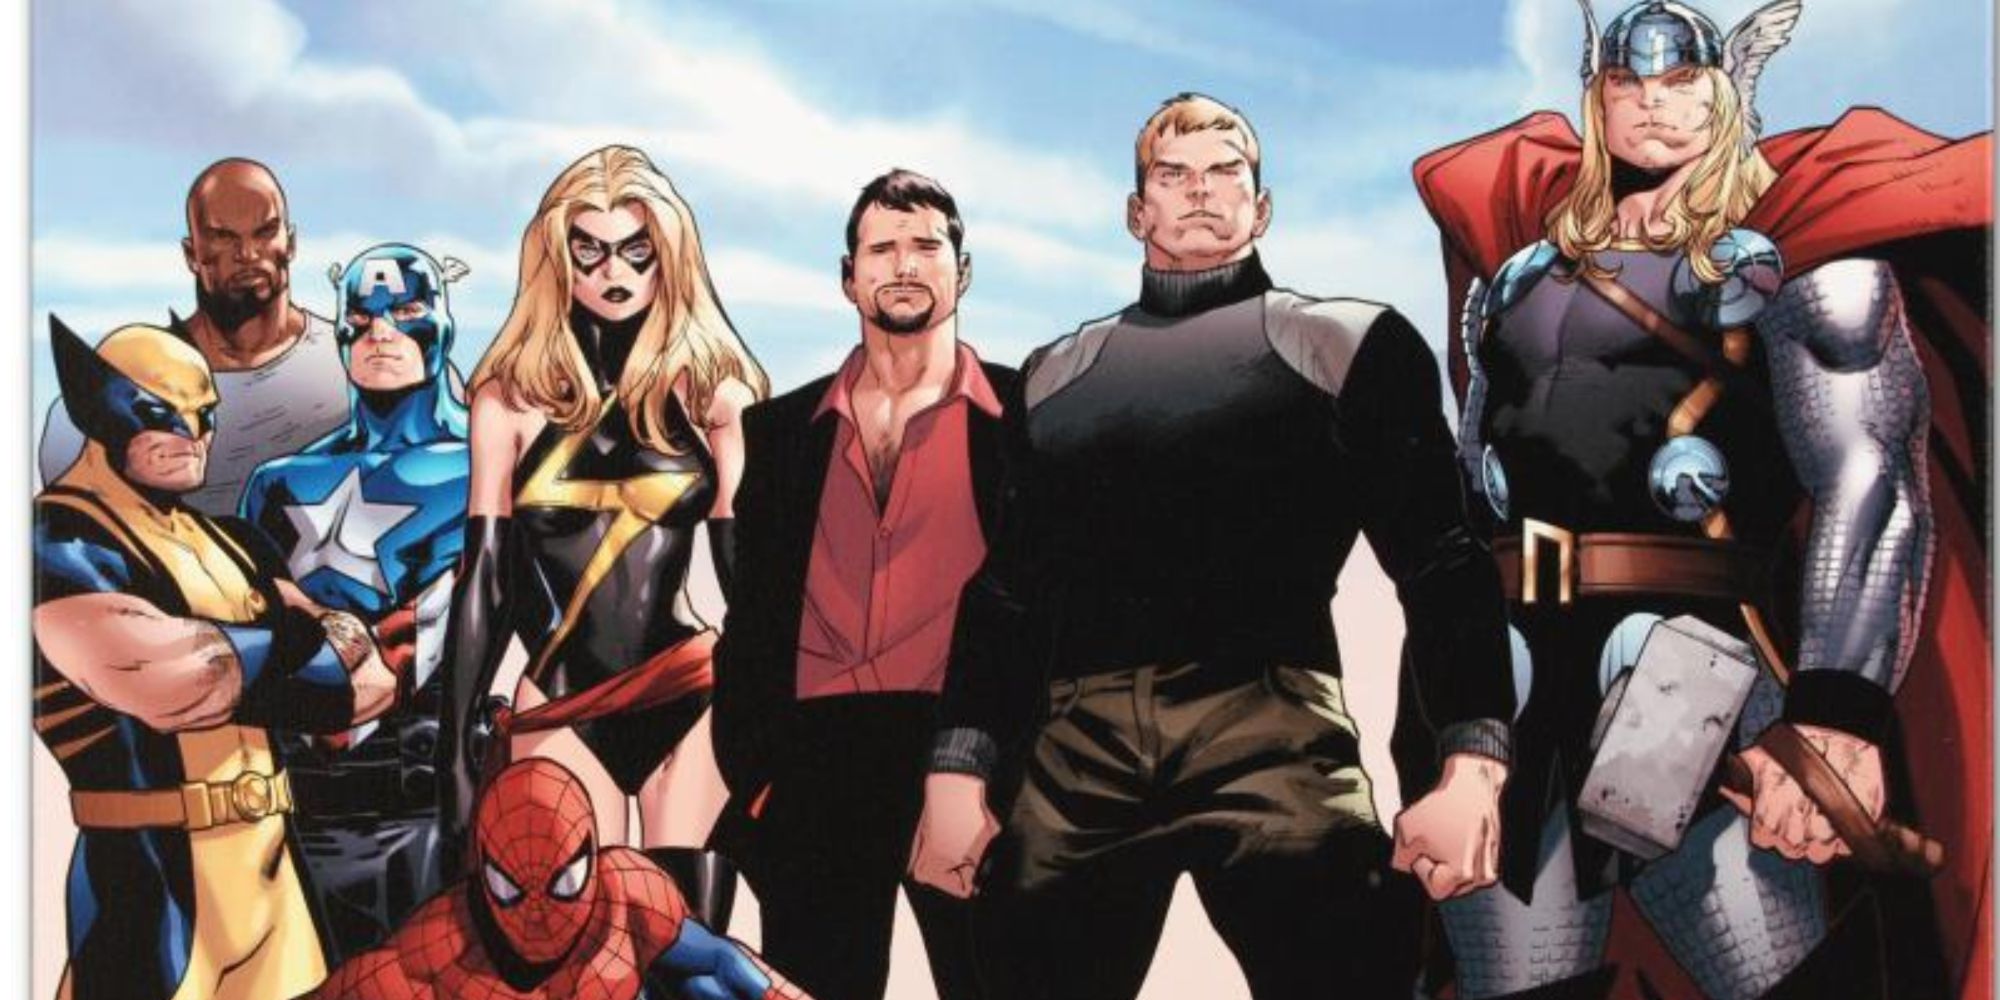 The final shot of Marvel Comics' Siege #4- Wolverine, Carol Danvers, Bucky Cap, Spider-Man, Luke Cage, Tony Stark, Steve Rogers, and Thor looking into the future.